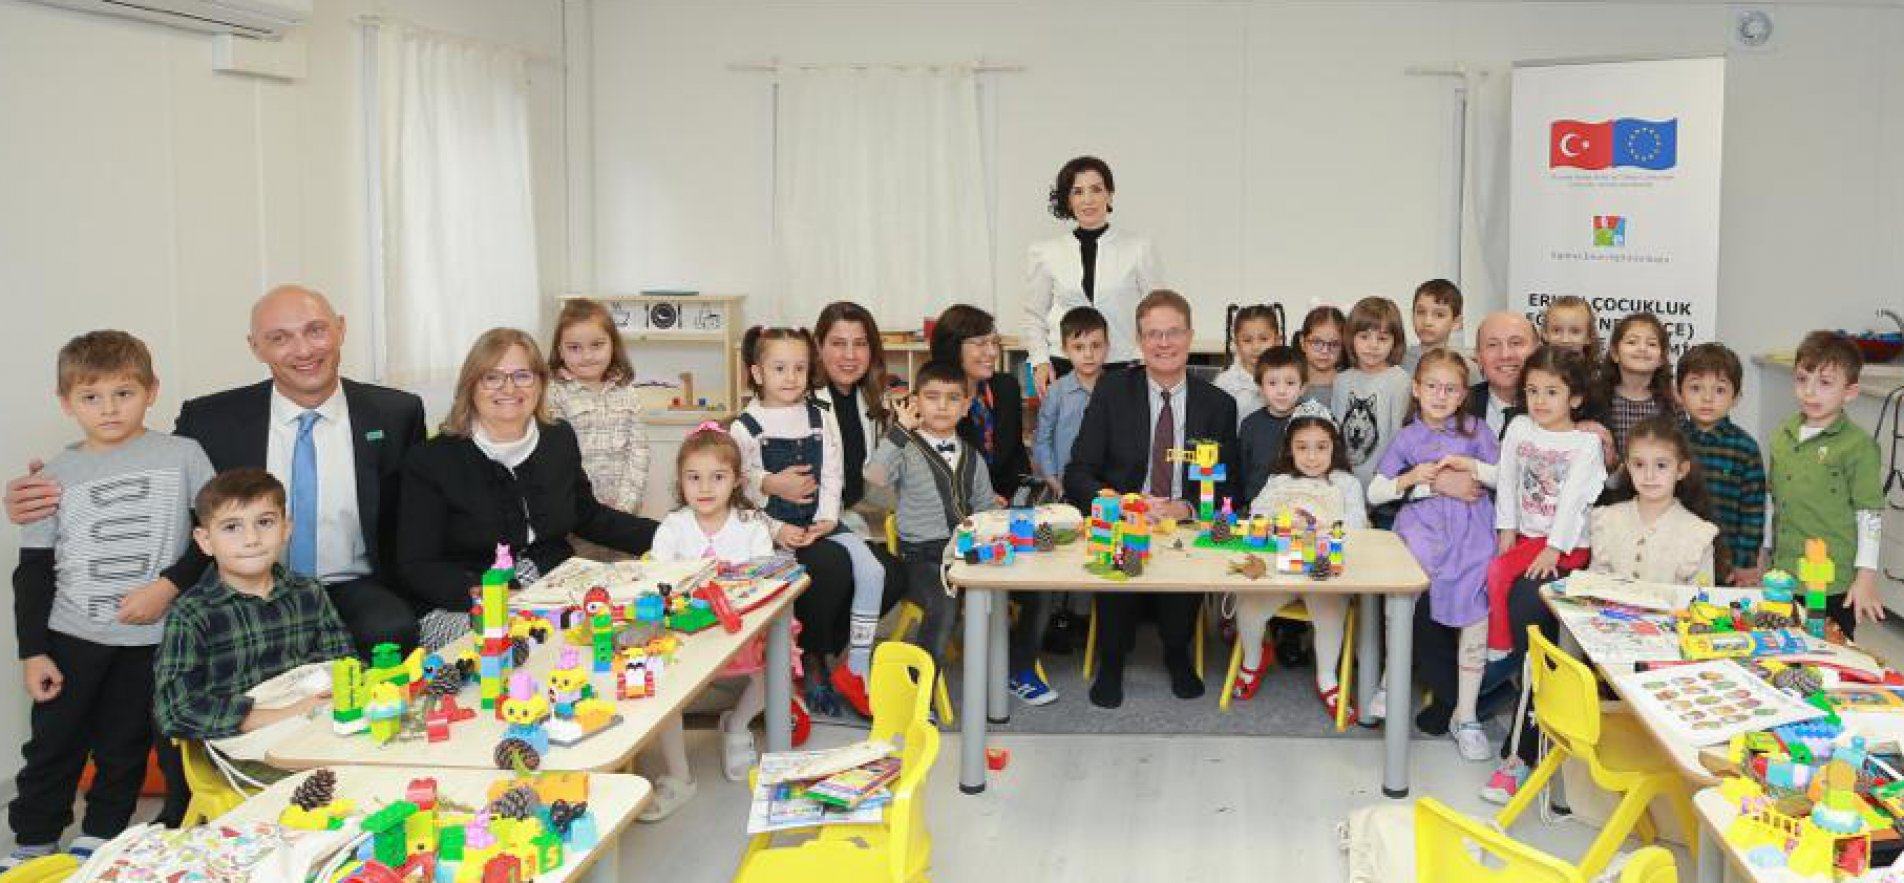 KINDERGARTEN INAUGURATED AS A PART OF THE PROJECT TO INCREASE THE QUALITY AND ACCESSIBILITY OF EARLY CHILDHOOD EDUCATION